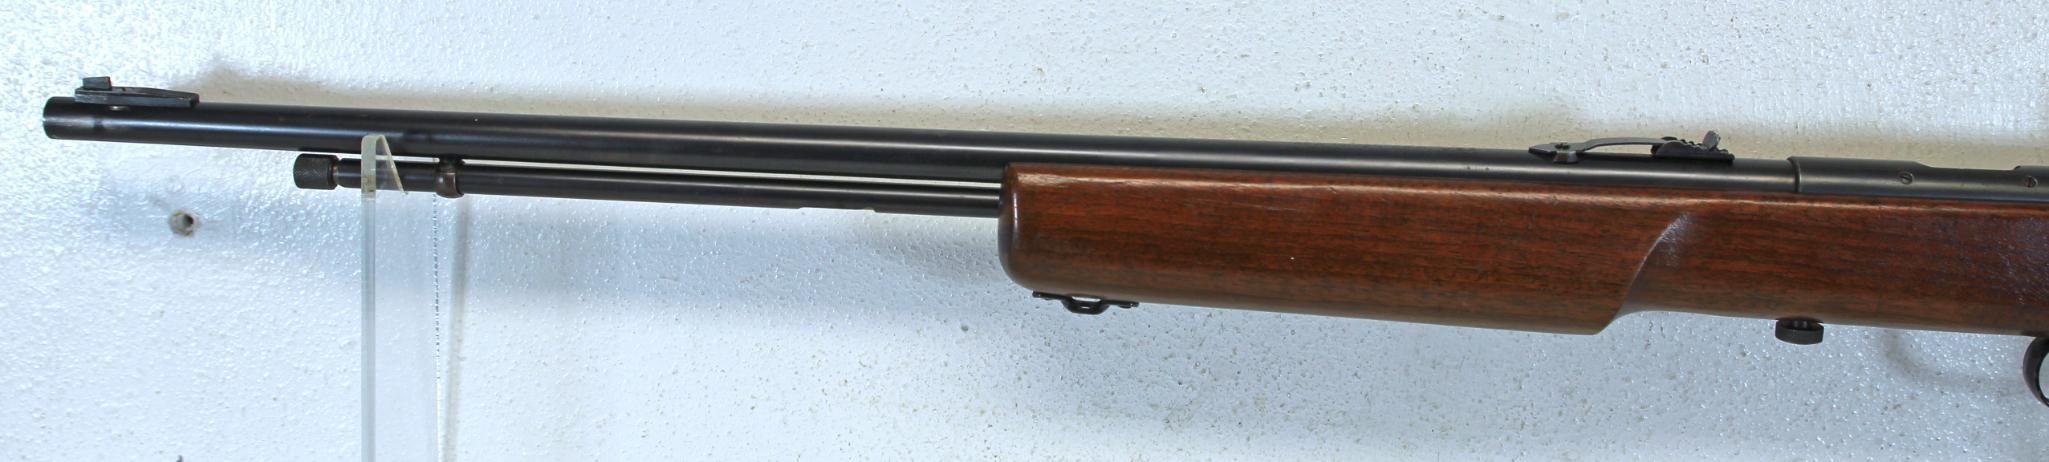 O.F. Mossberg and Sons Model No. 46A .22 S,L,LR Bolt Action...Rifle w/Mossberg...No. 4A Peep Sight